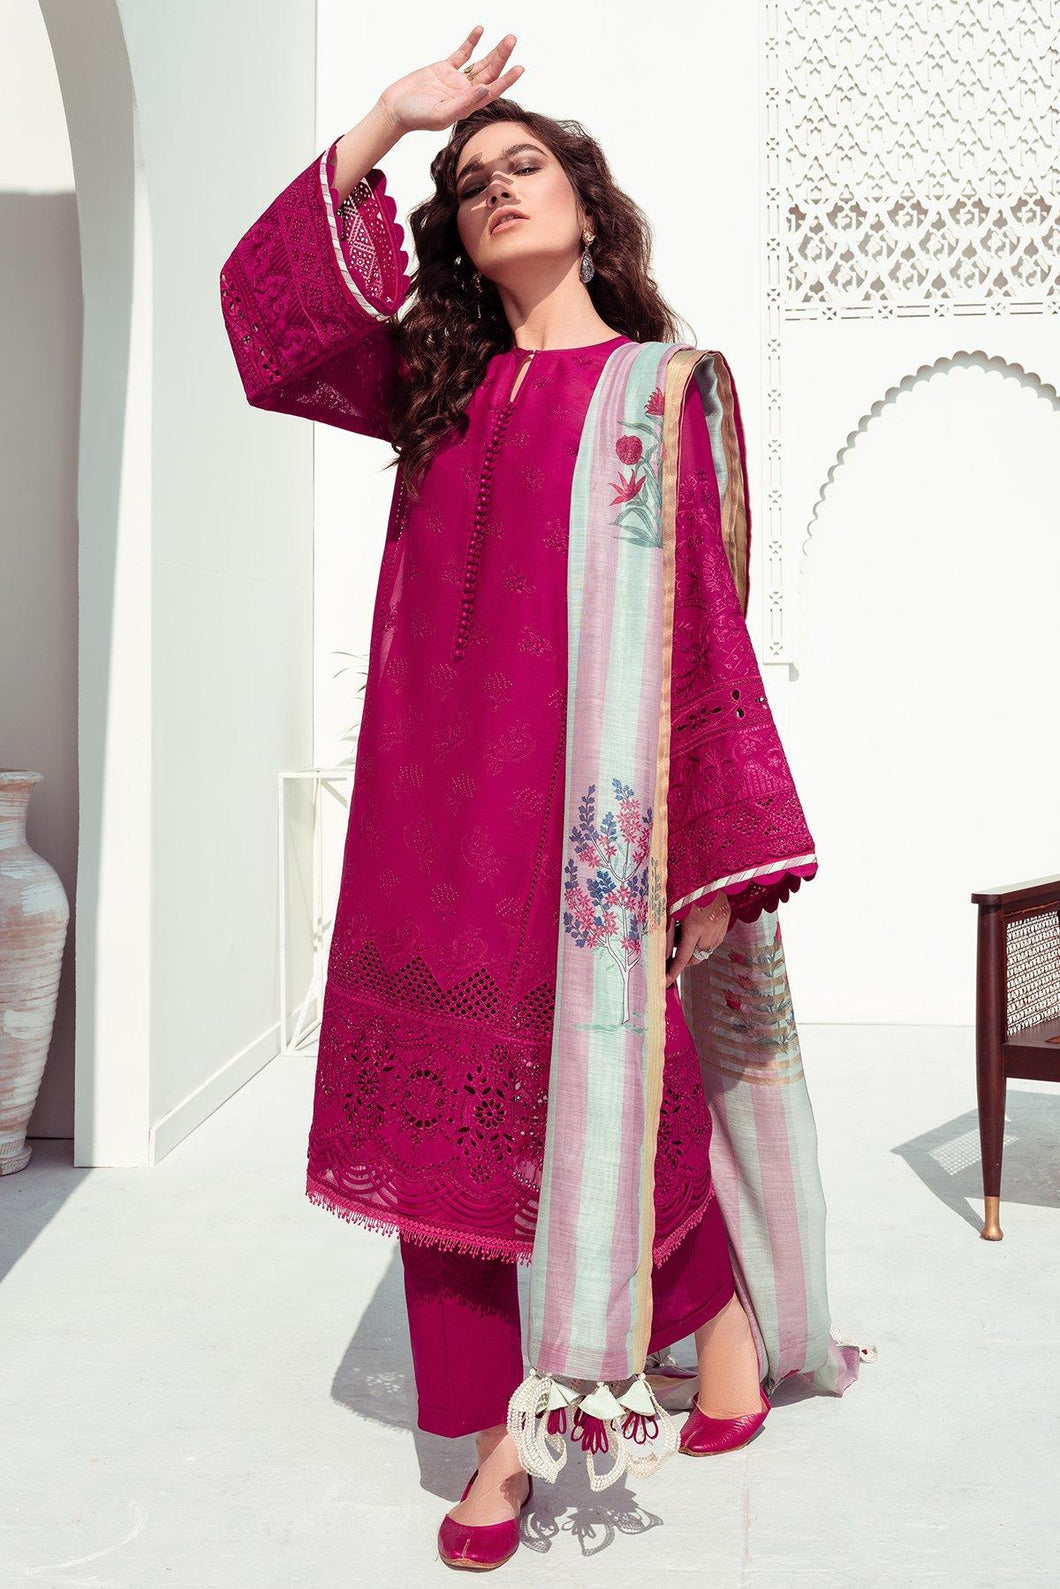 Buy Baroque Swiss Summer Collection 2021 - Dolcetto at exclusive price. Shop Purple & Magenta Pink outfits of BAROQUE LAWN, MARIA B M PRINTS 2021 for Evening wear PAKISTANI DESIGNER DRESSES ONLINE UK available at LEBAASONLINE on SALE prices Get the latest designer dresses and ready to wear in Austria, Spain & UK